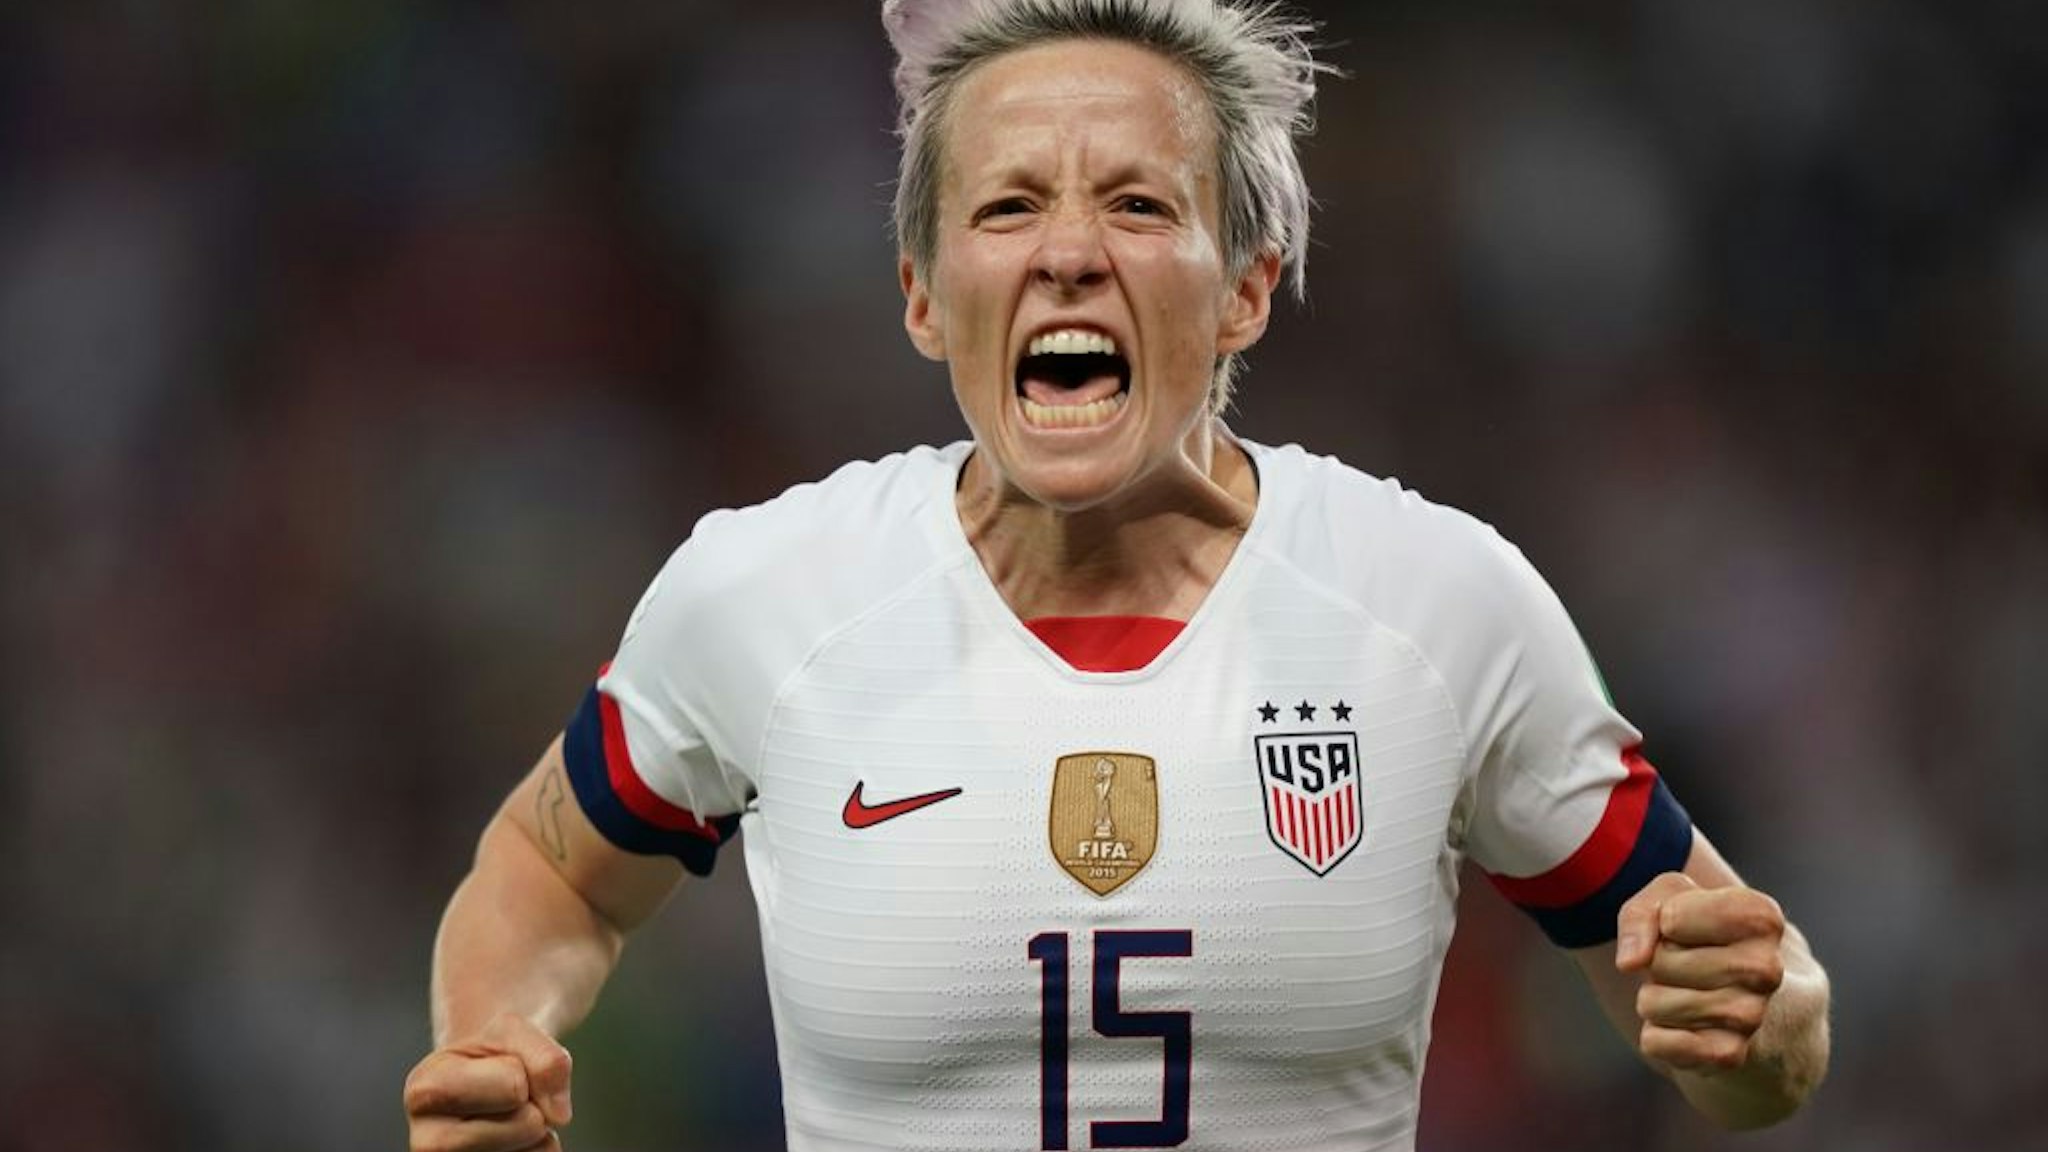 TOPSHOT - United States' forward Megan Rapinoe celebrates after scoring a goal during the France 2019 Women's World Cup quarter-final football match between France and USA, on June 28, 2019, at the Parc des Princes stadium in Paris. (Photo by Lionel BONAVENTURE / AFP) (Photo credit should read LIONEL BONAVENTURE/AFP via Getty Images)